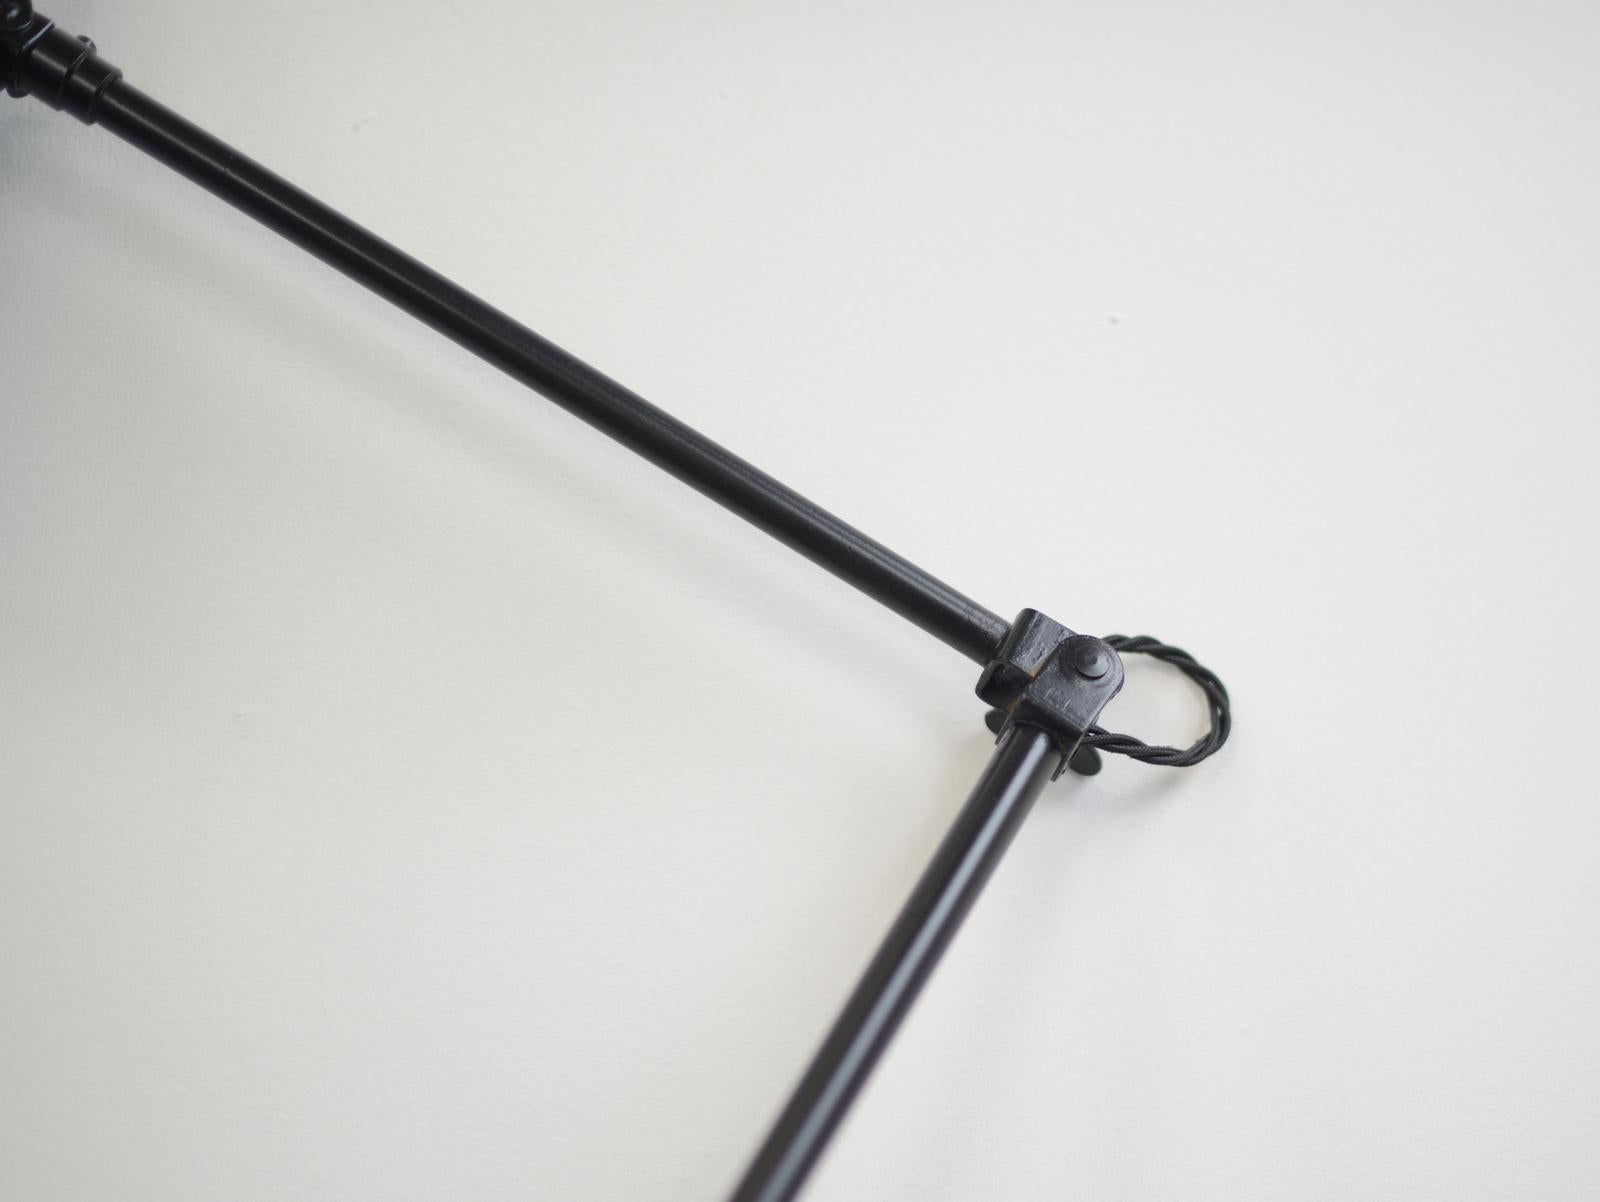 Bauhaus Clamp on Industrial Task Lamp by Schaco, circa 1930s